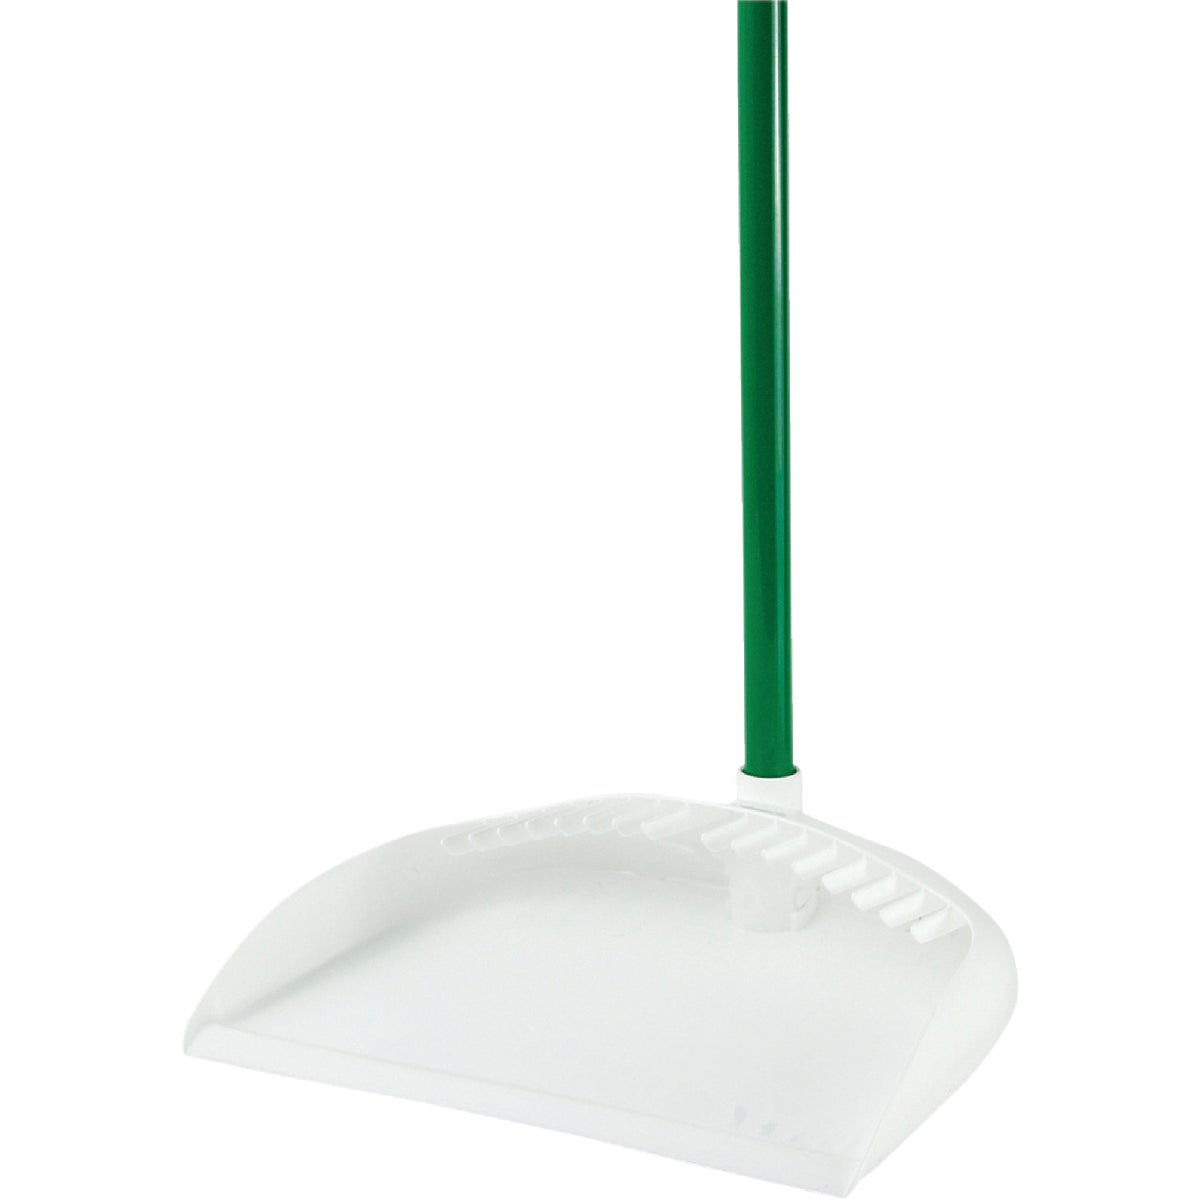 Item 600272, A high quality Libman dustpan with dirt removal teeth, attached to a handle